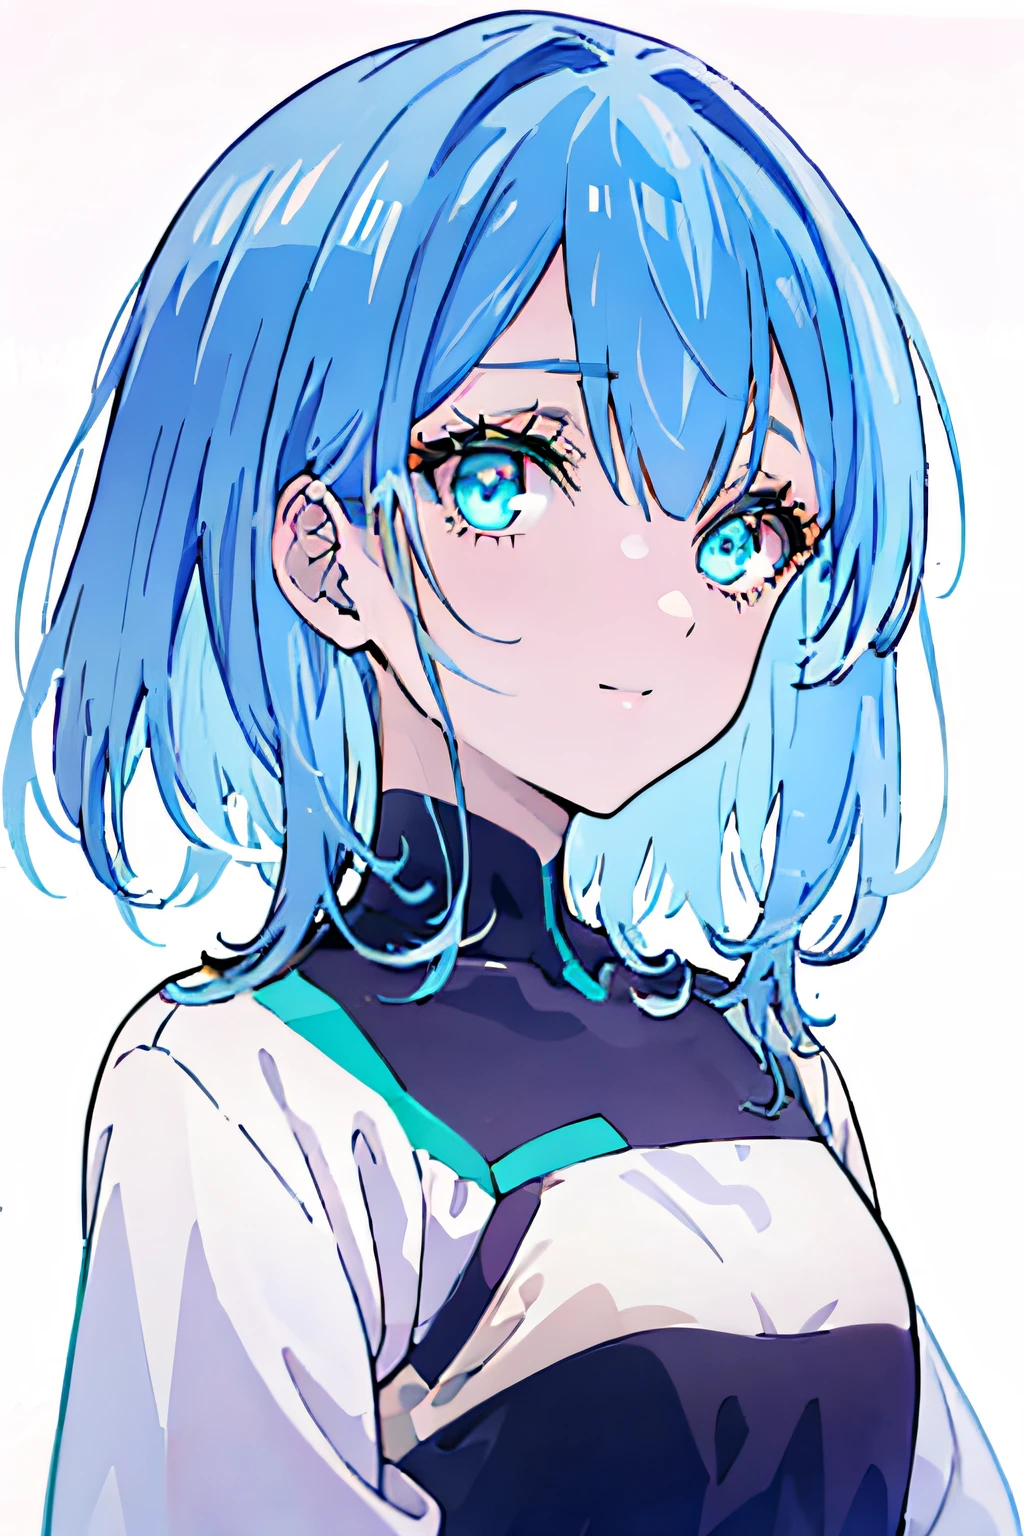 (White background, hight resolution, very precise details,nmasterpiece， top Quority，top-quality)the beautiful and delicate girl, Beautiful detailed girl, intricate detailes, extremely beautiful detailed anime face and eyes, , A smile、up close shot, extra detailed body, flat chest, , young,20 years old, Short hair, flipped hair, aqua hair, Two-tone hair, beautiful detailed hair, Beautiful face, extremely detailed cute anime face, Detailed beautiful eyes, pale blue eyes, White skin,pixels，pixel art, swordsmen, Simple black coat,cyberpunked,